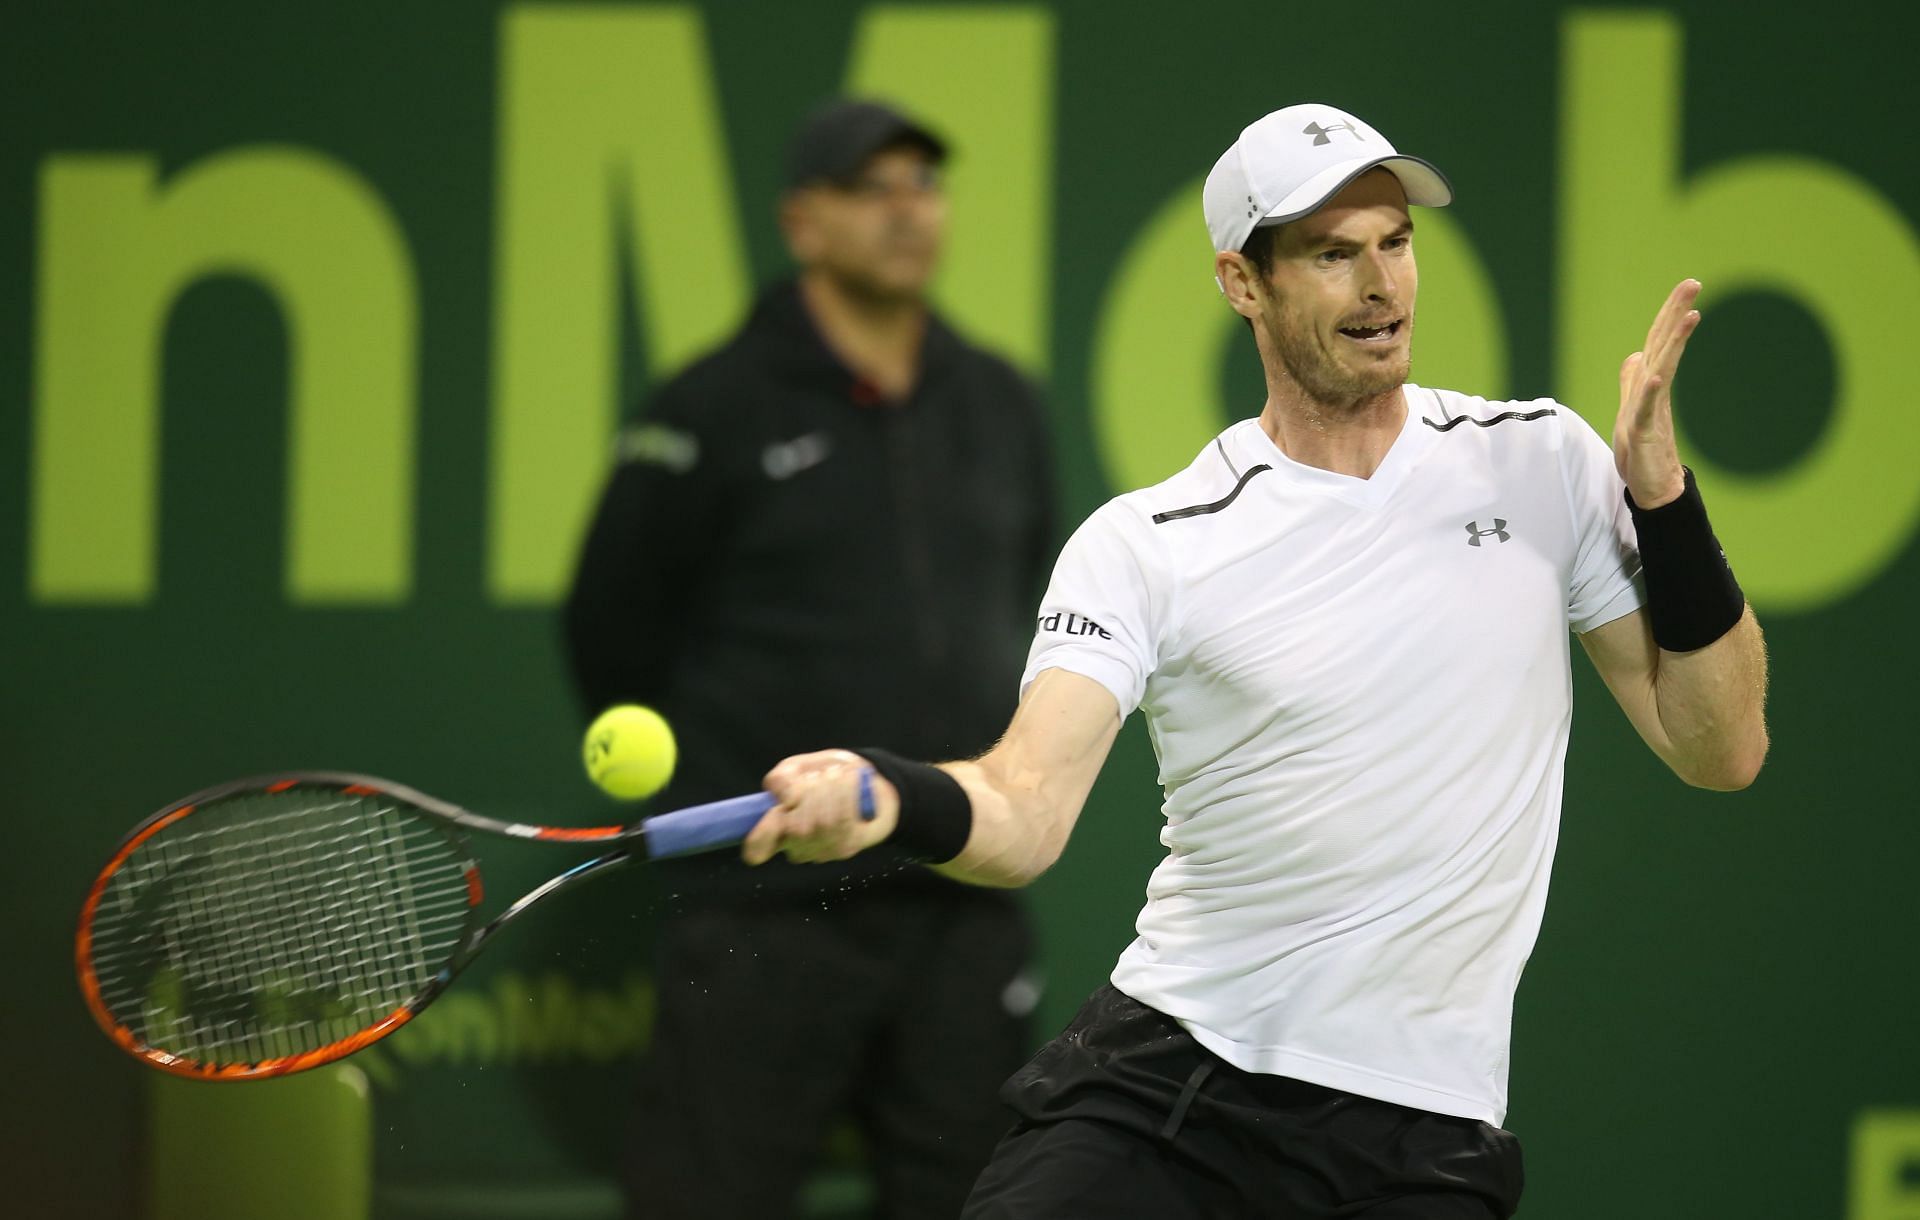 Andy Murray finished runner-up to Novak Djokovic in his previous visit to Doha in 2017